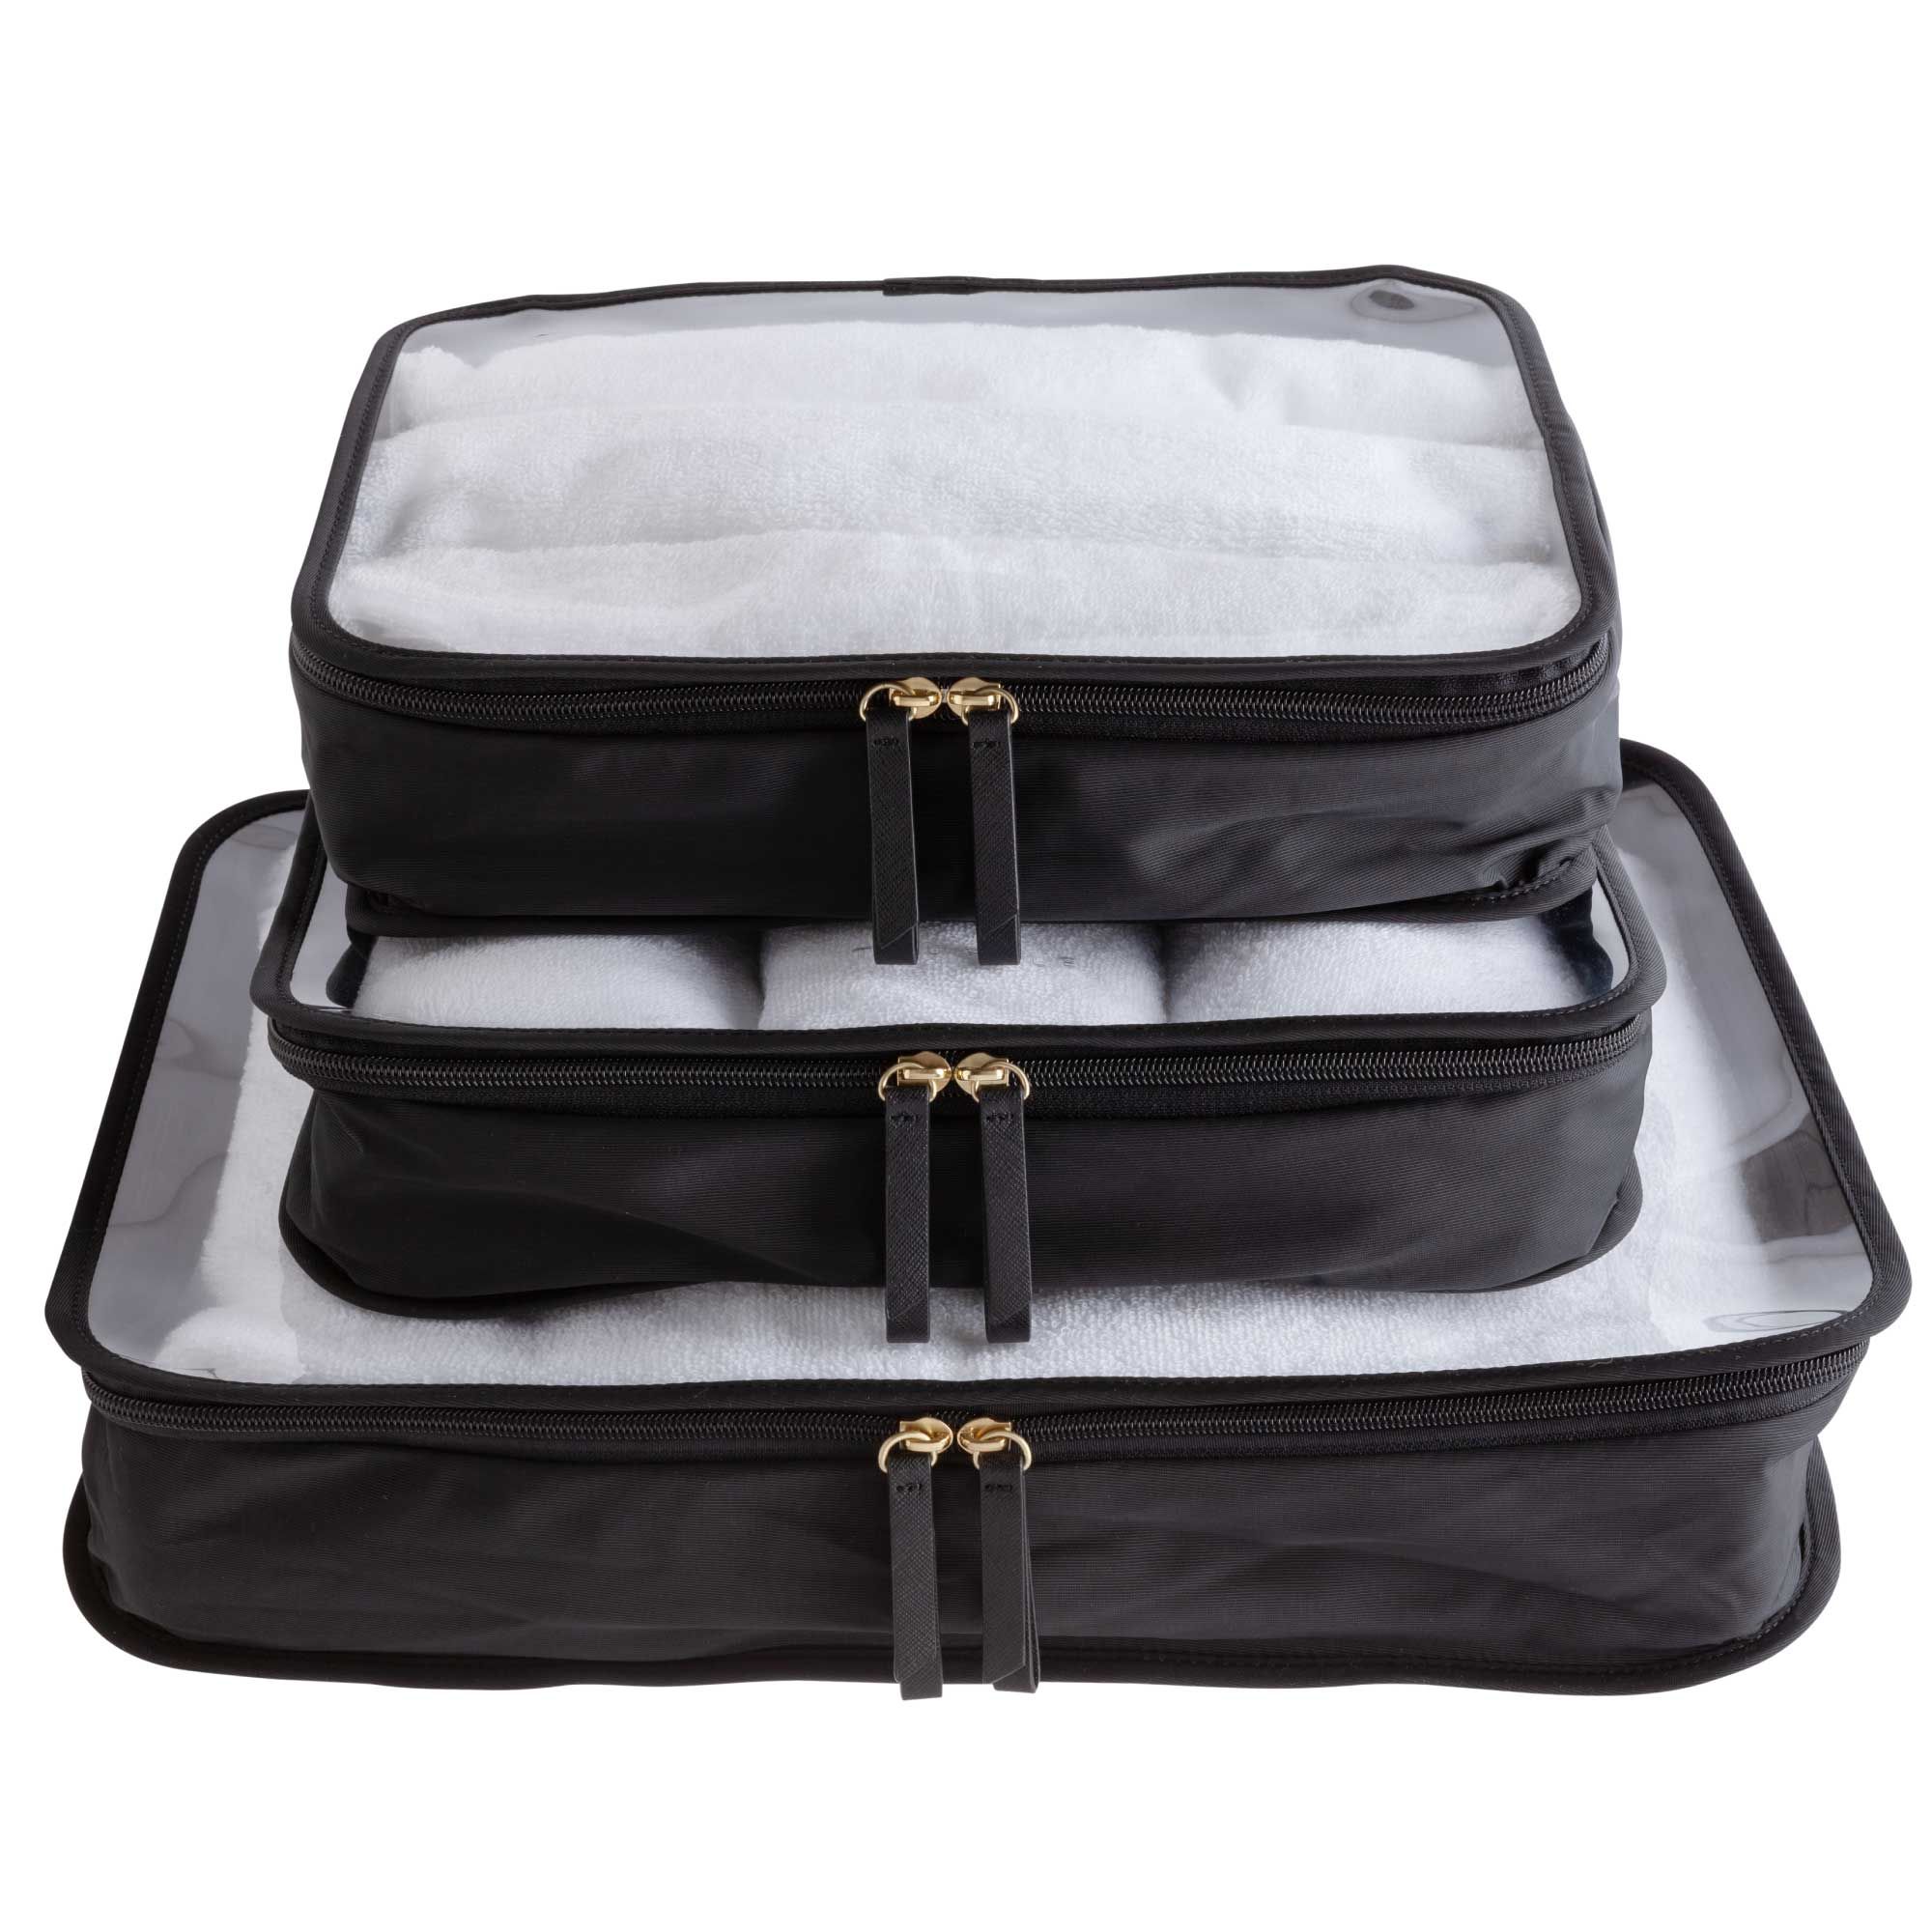 Clarity Packing Cube Trio - See Through Packing Cubes | Truffle | TRUFFLE